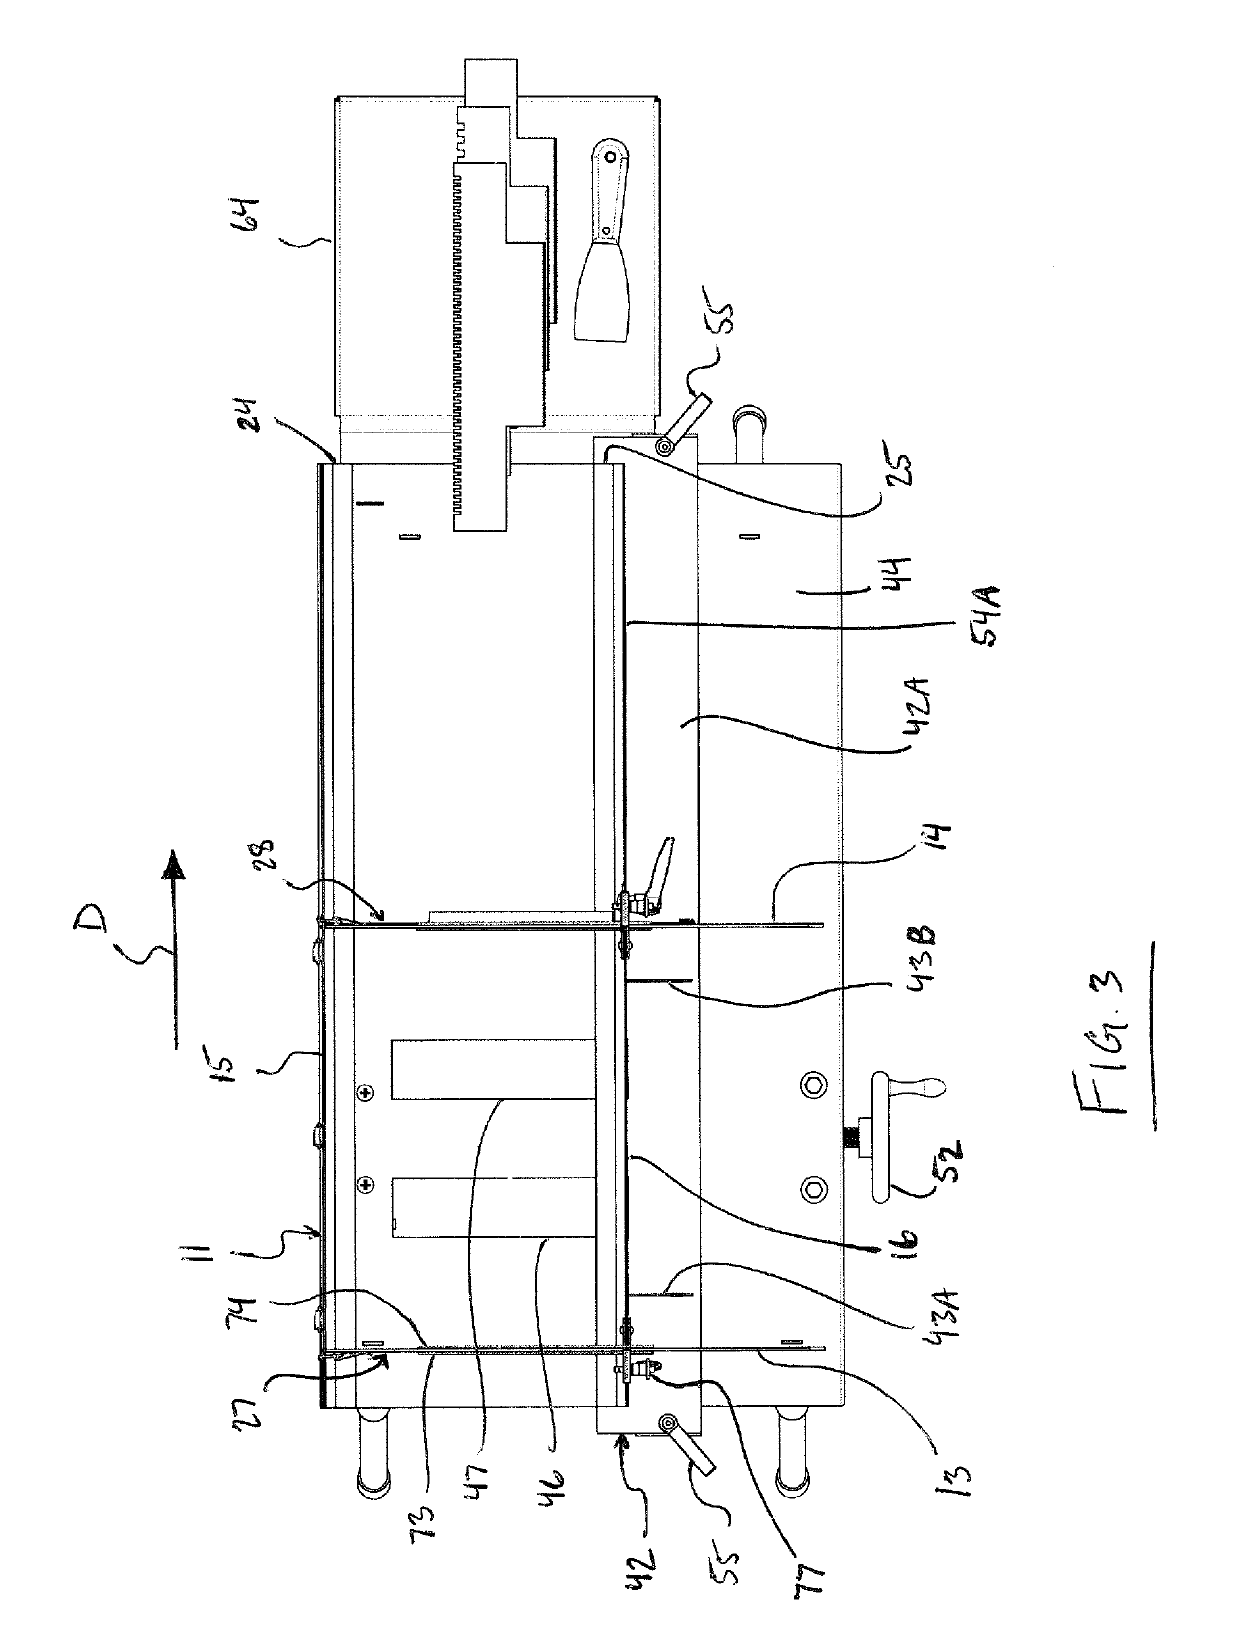 Adhesive application apparatus for tiles